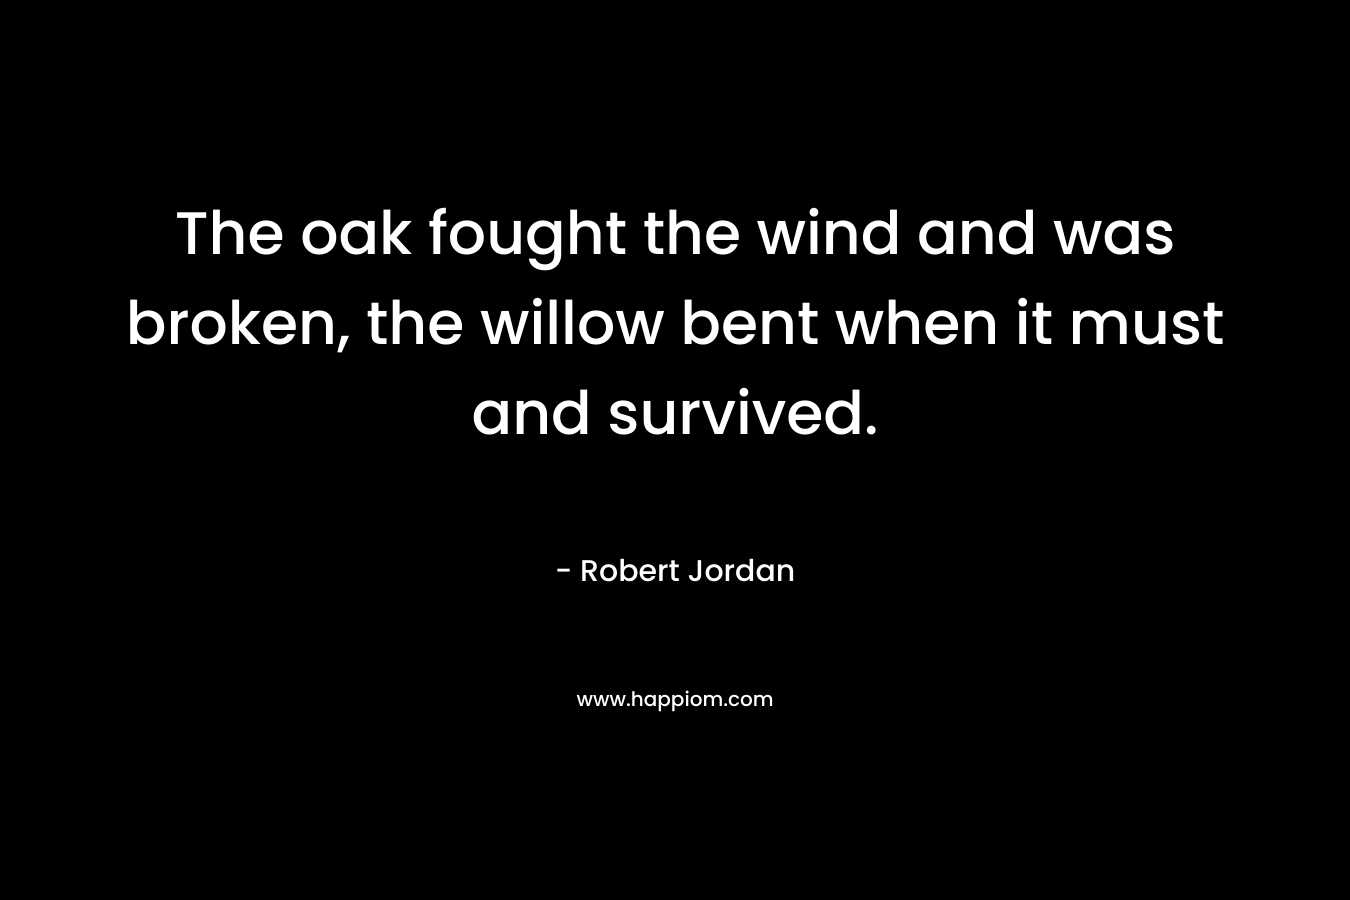 The oak fought the wind and was broken, the willow bent when it must and survived. – Robert Jordan